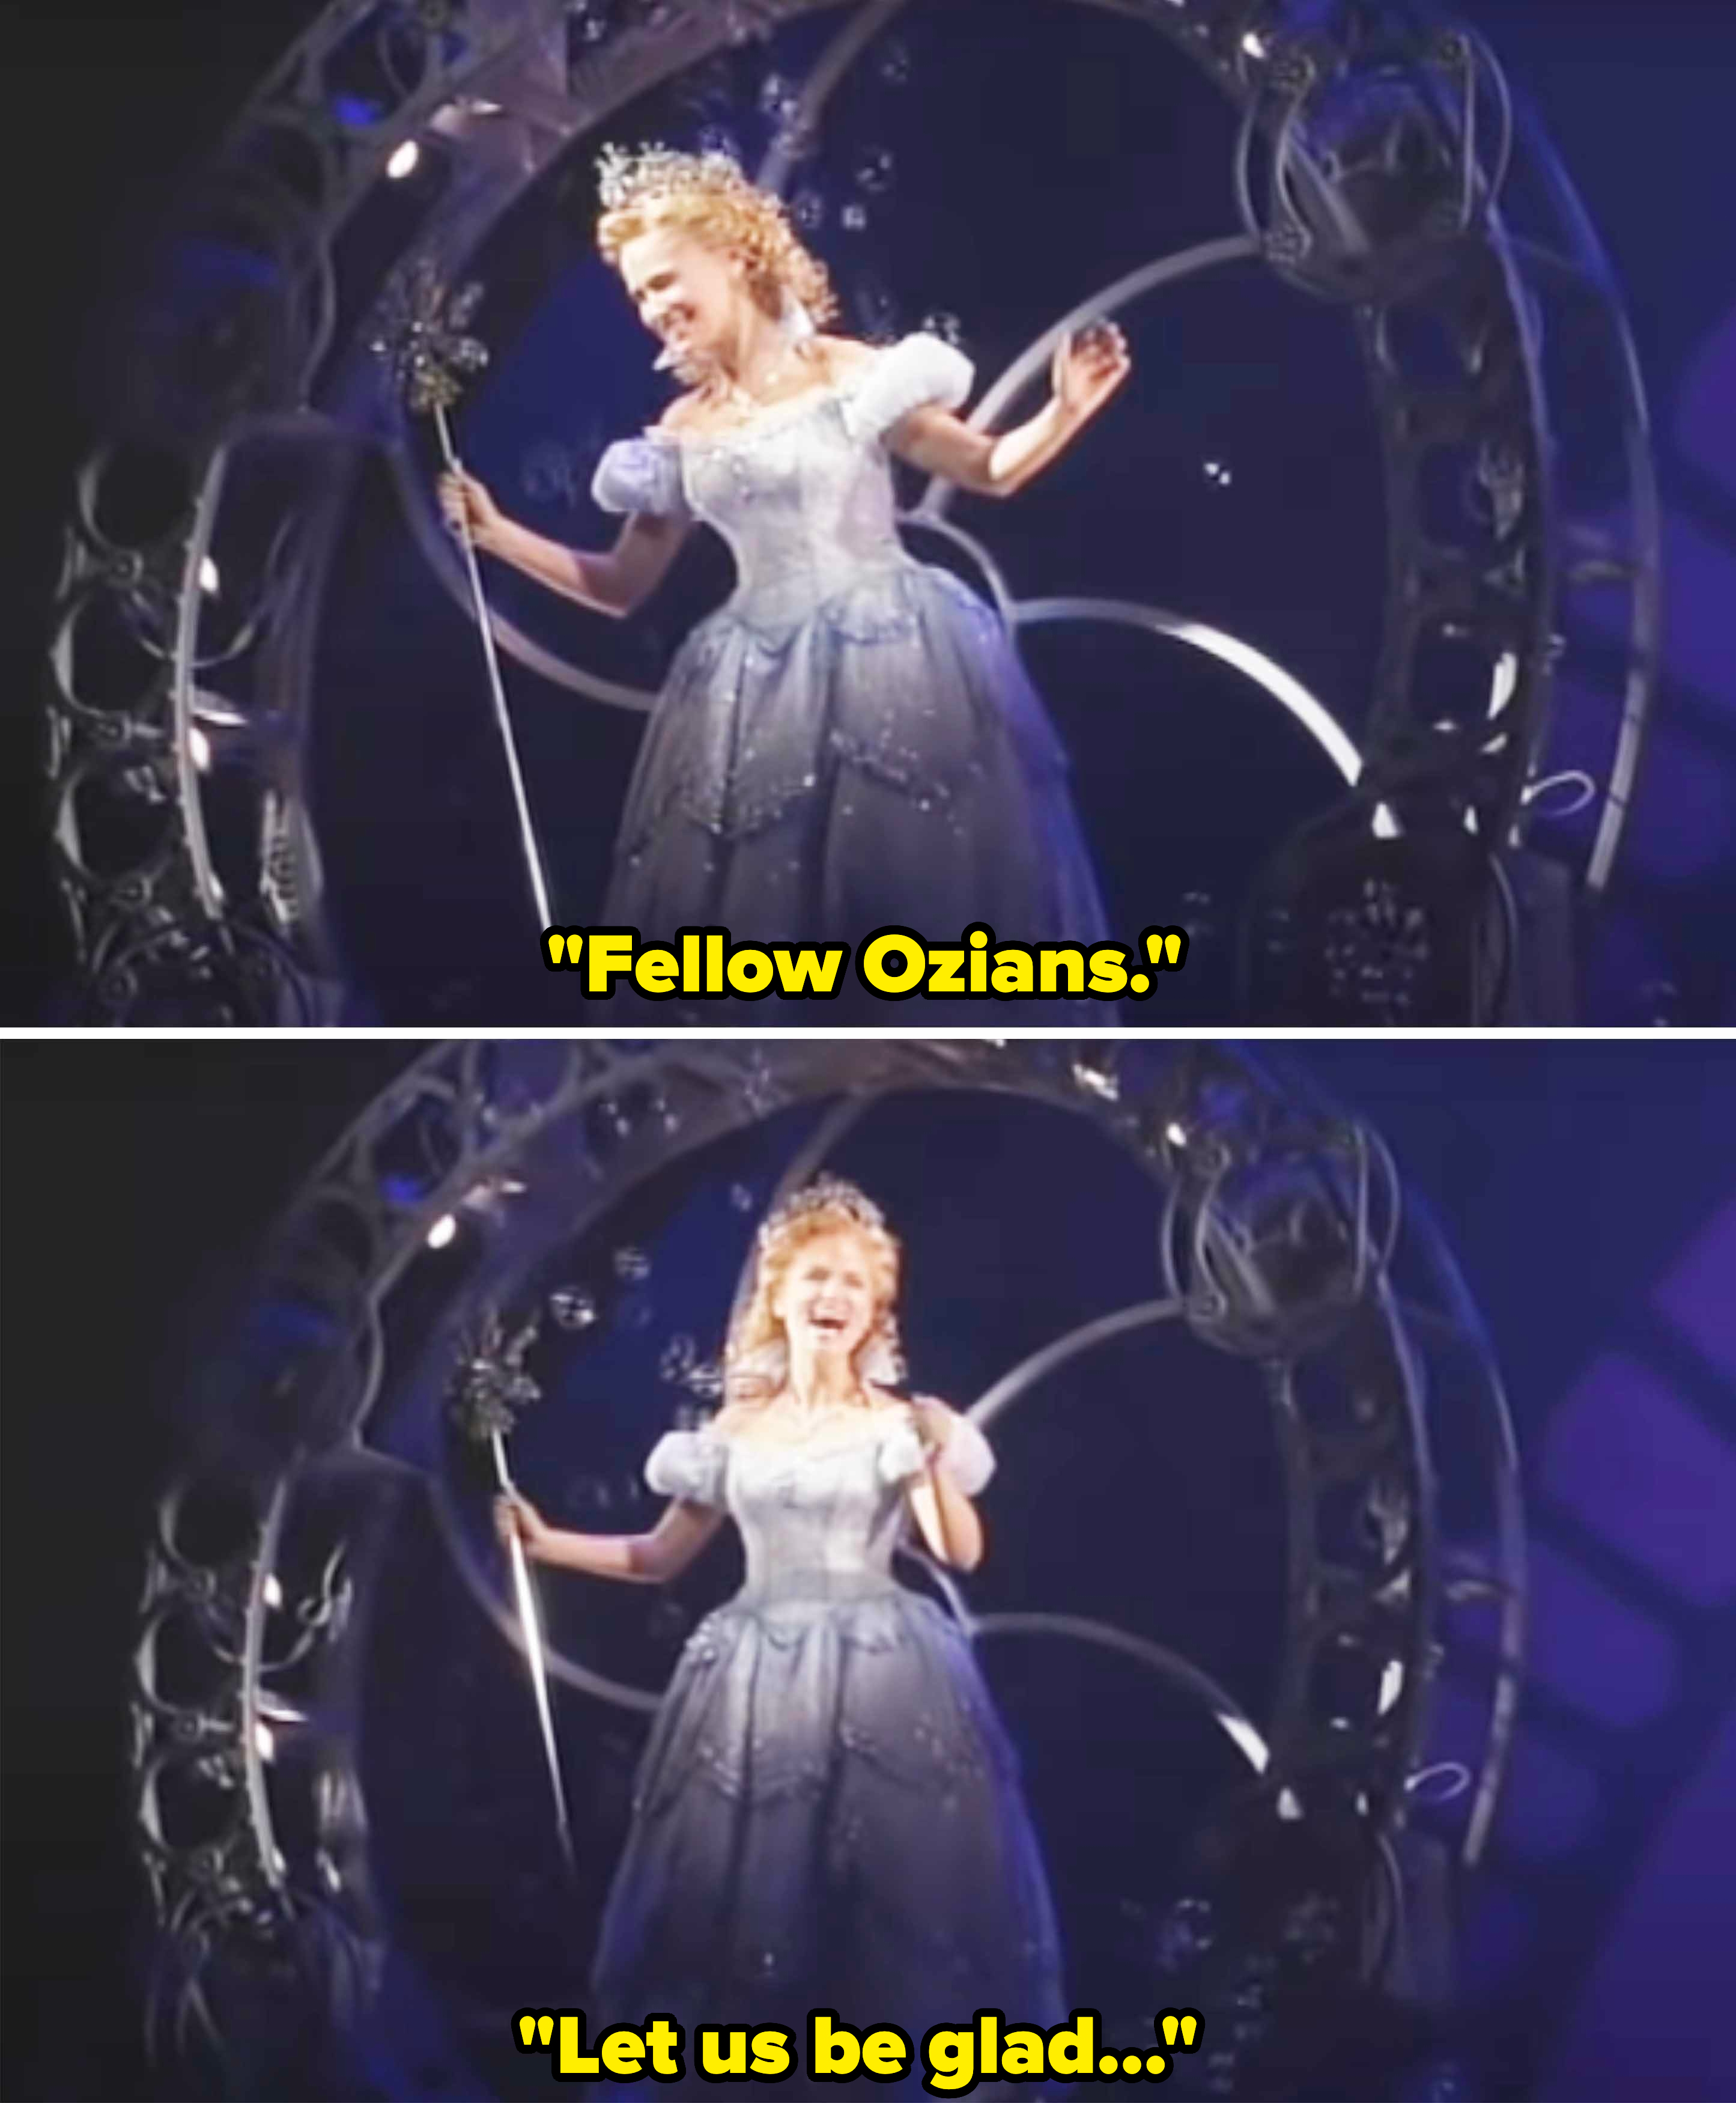 Glinda in the stage show referring to &quot;fellow Ozians&quot;